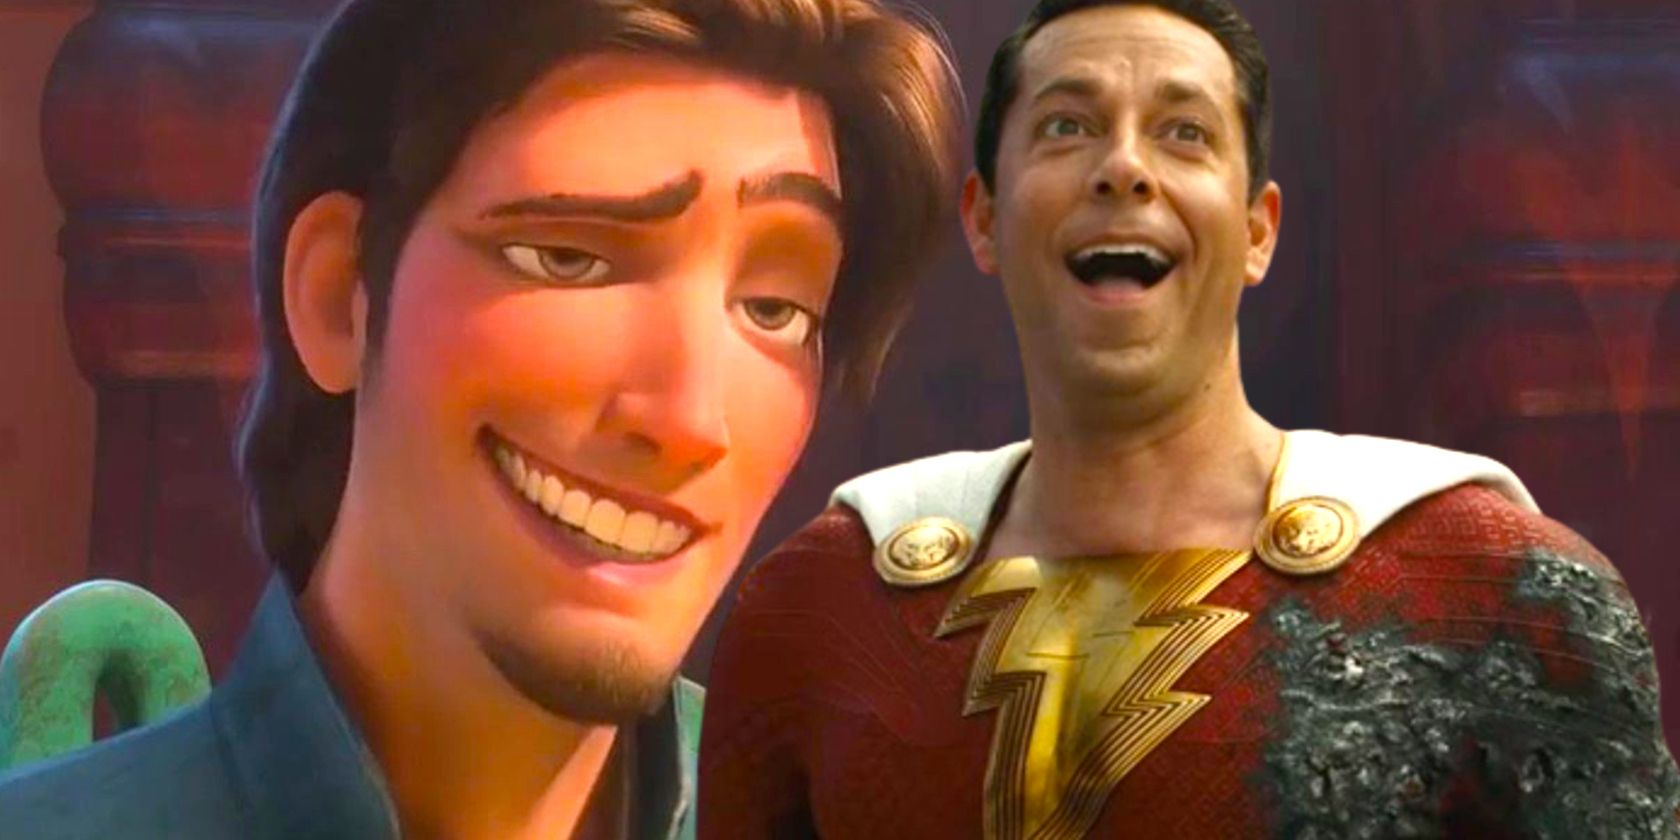 Flynn trying to smile in Tangled and Billy Batson smiling in Shazam Fury of the Gods